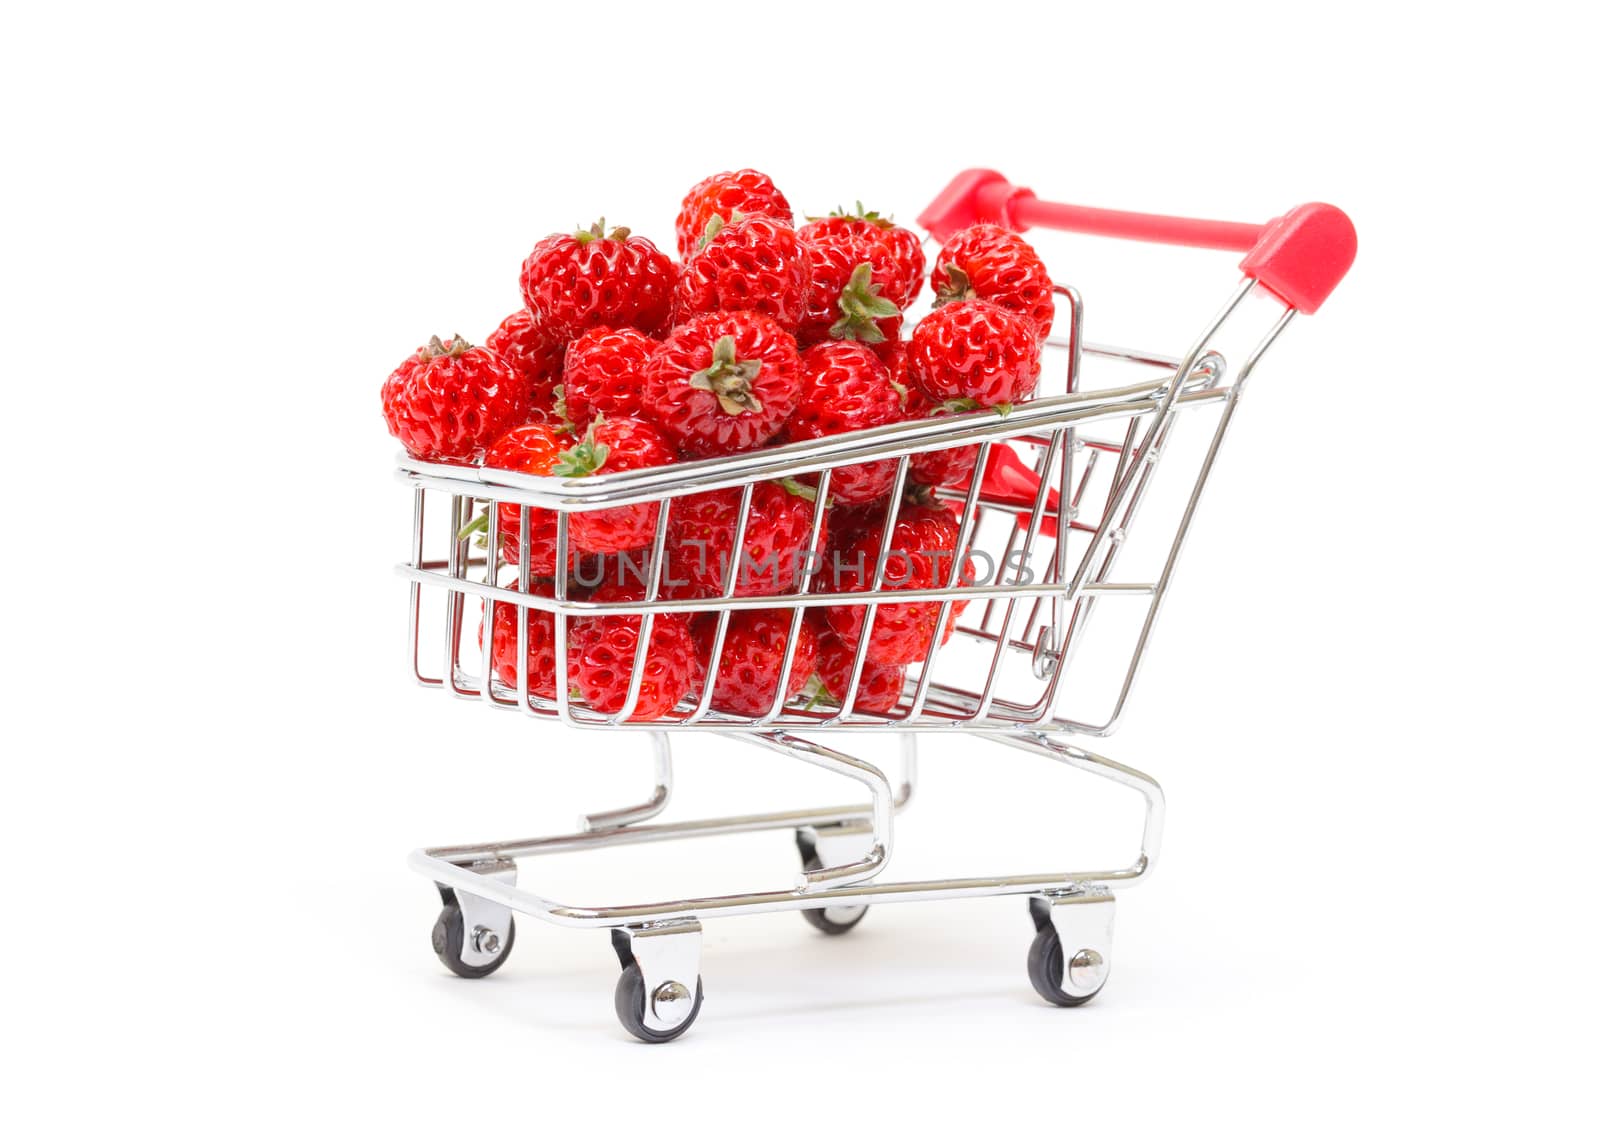 Ripe Red strawberries in shopping cart by Discovod